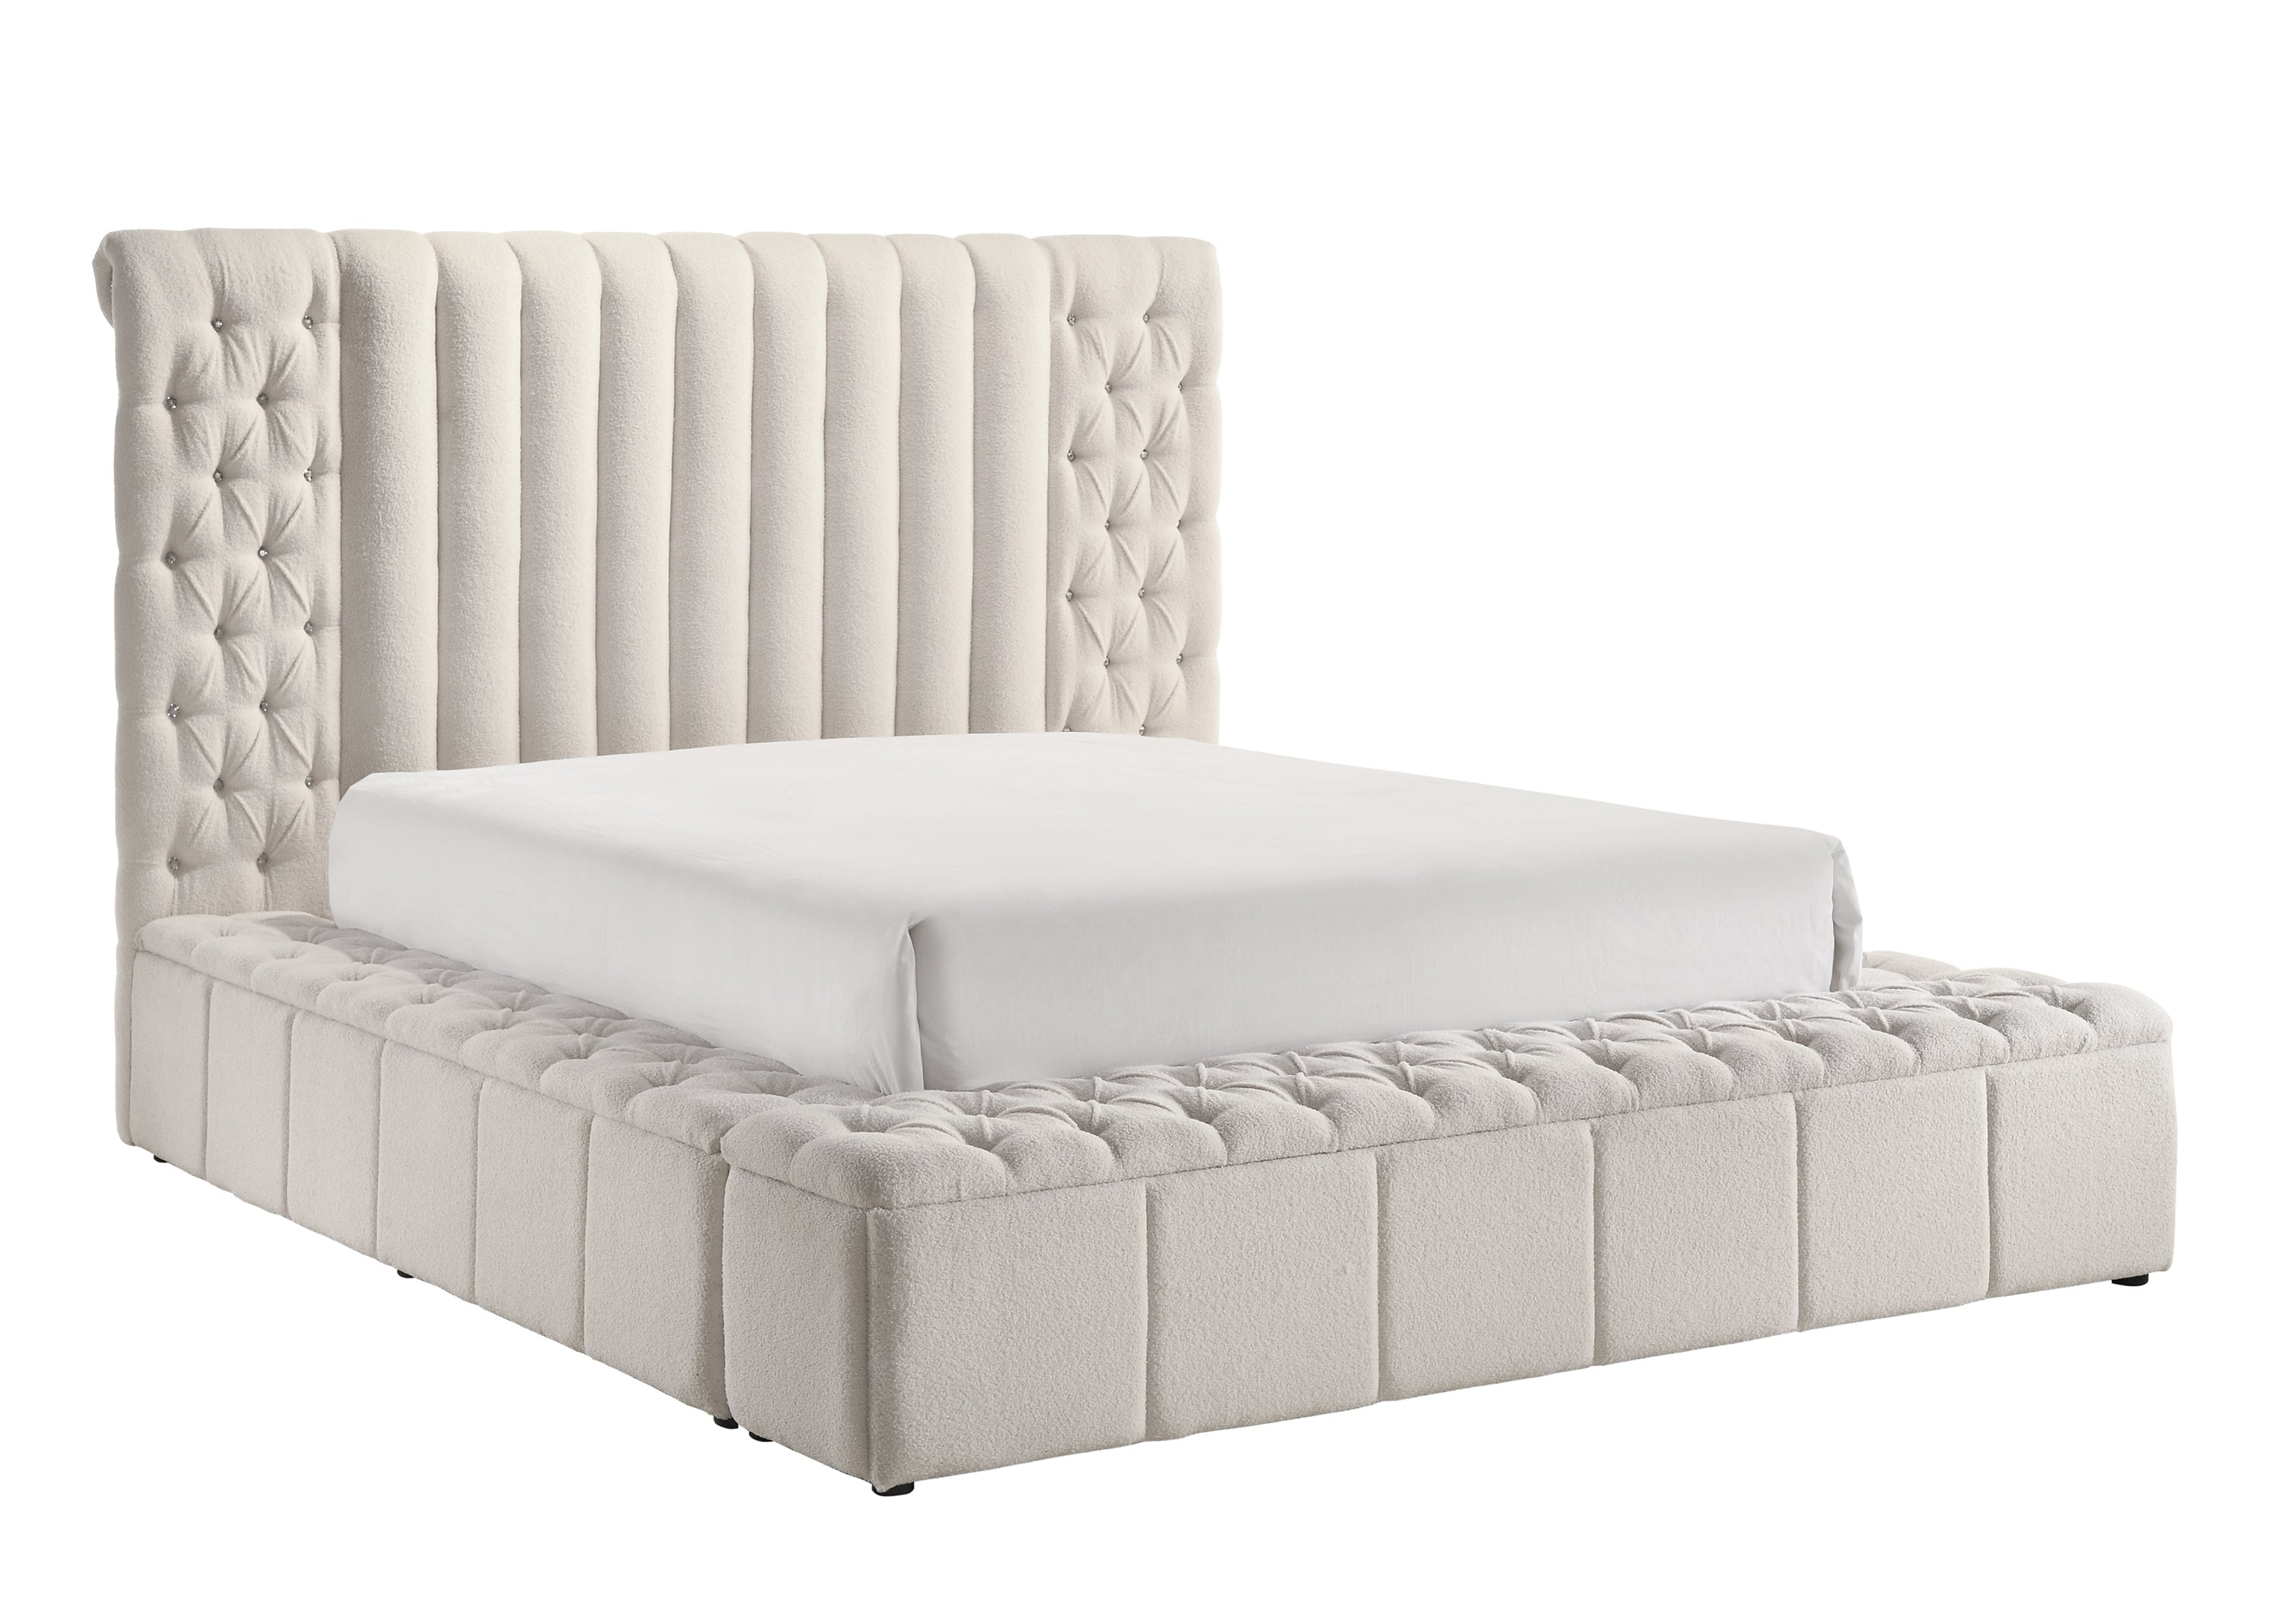 https://bienhome.com/cdn/shop/products/danbury-white-boucle-queen-upholstered-storage-panel-bed-set_5201wh-q-hb_5201wh-q-fb_5201wh-kq-hbpl_5201wh-kq-rl-l_5201wh-kq-rl-r-bien-home-furniture-_-electronics-6.jpg?v=1701883103&width=3840